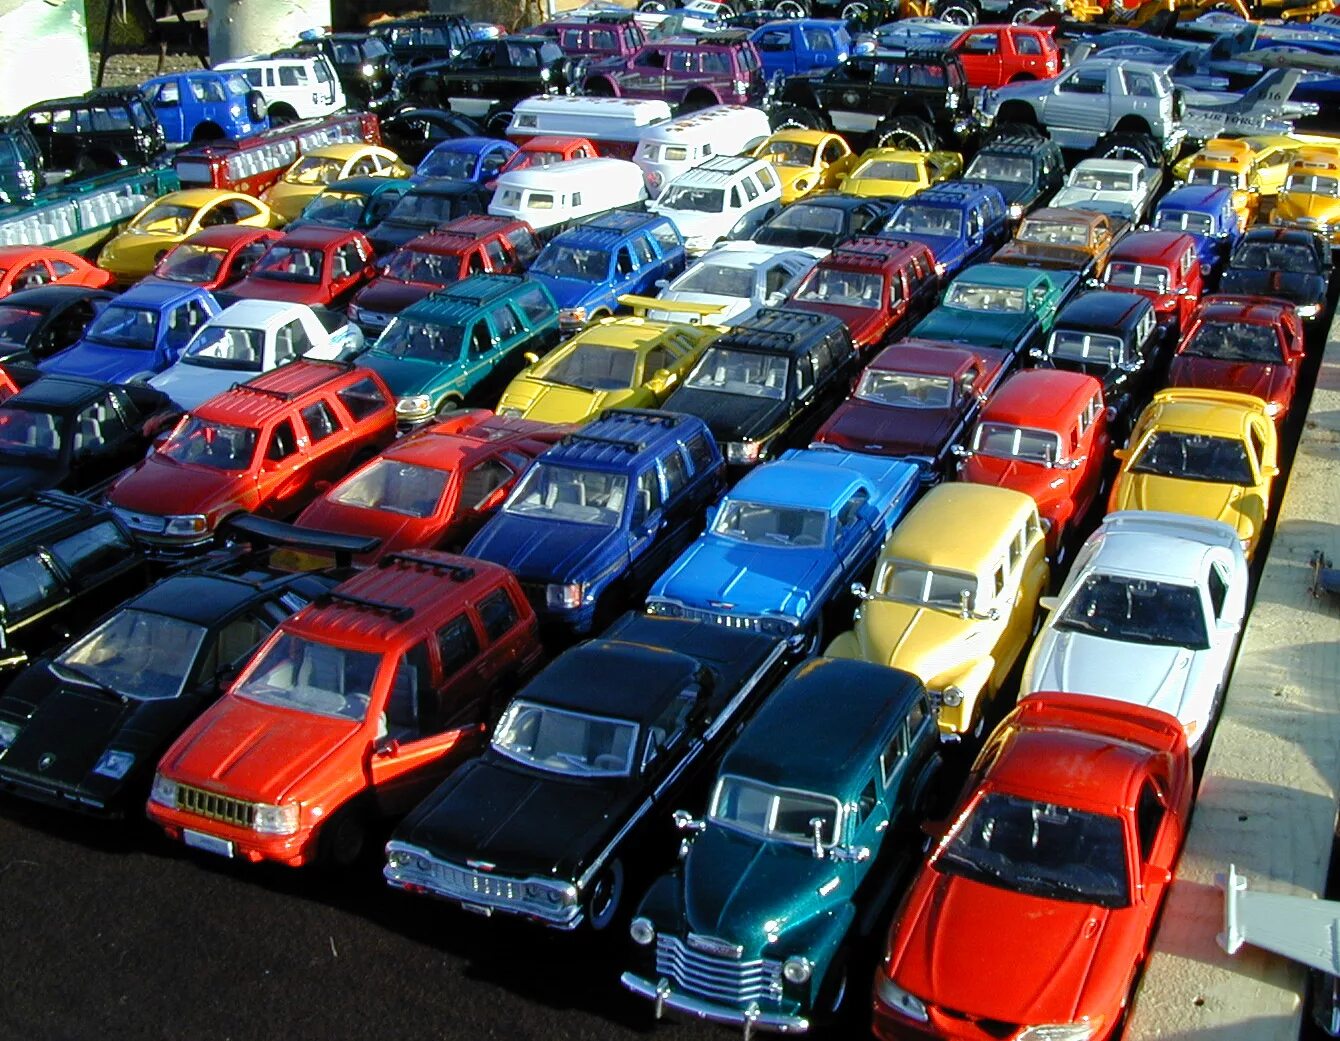 Cars lots of people. Дел машина. All cars. Car collection. Lots of cars.